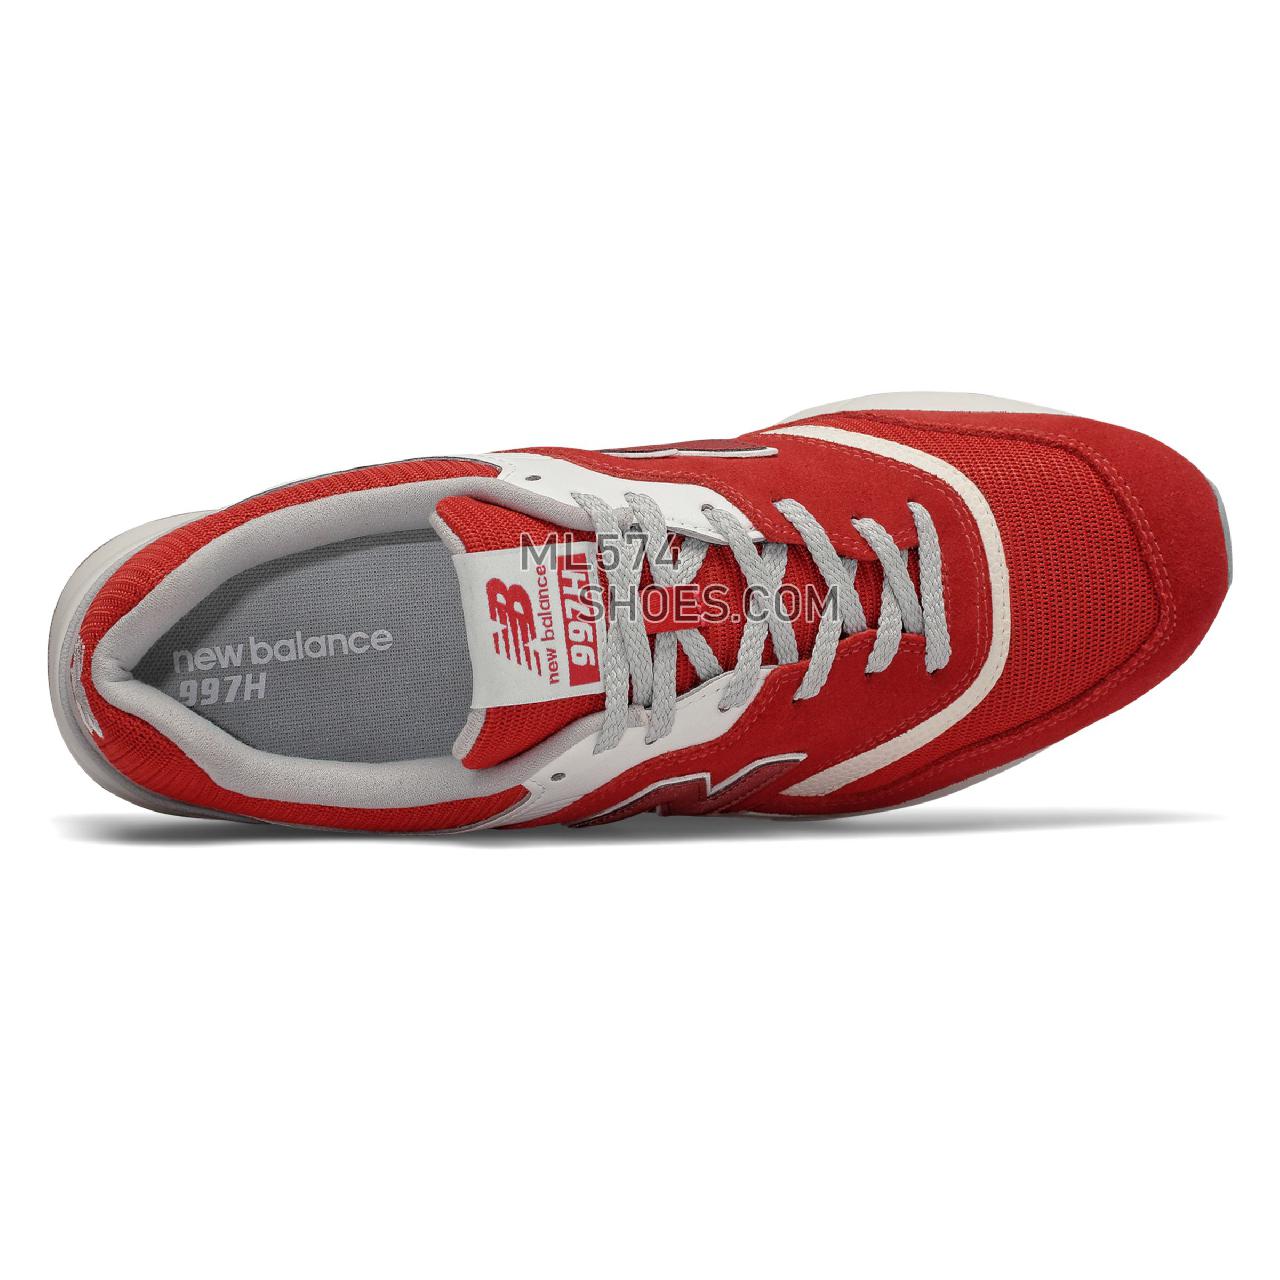 New Balance 997H - Men's Classic Sneakers - Team Red with Rain Cloud - CM997HDS